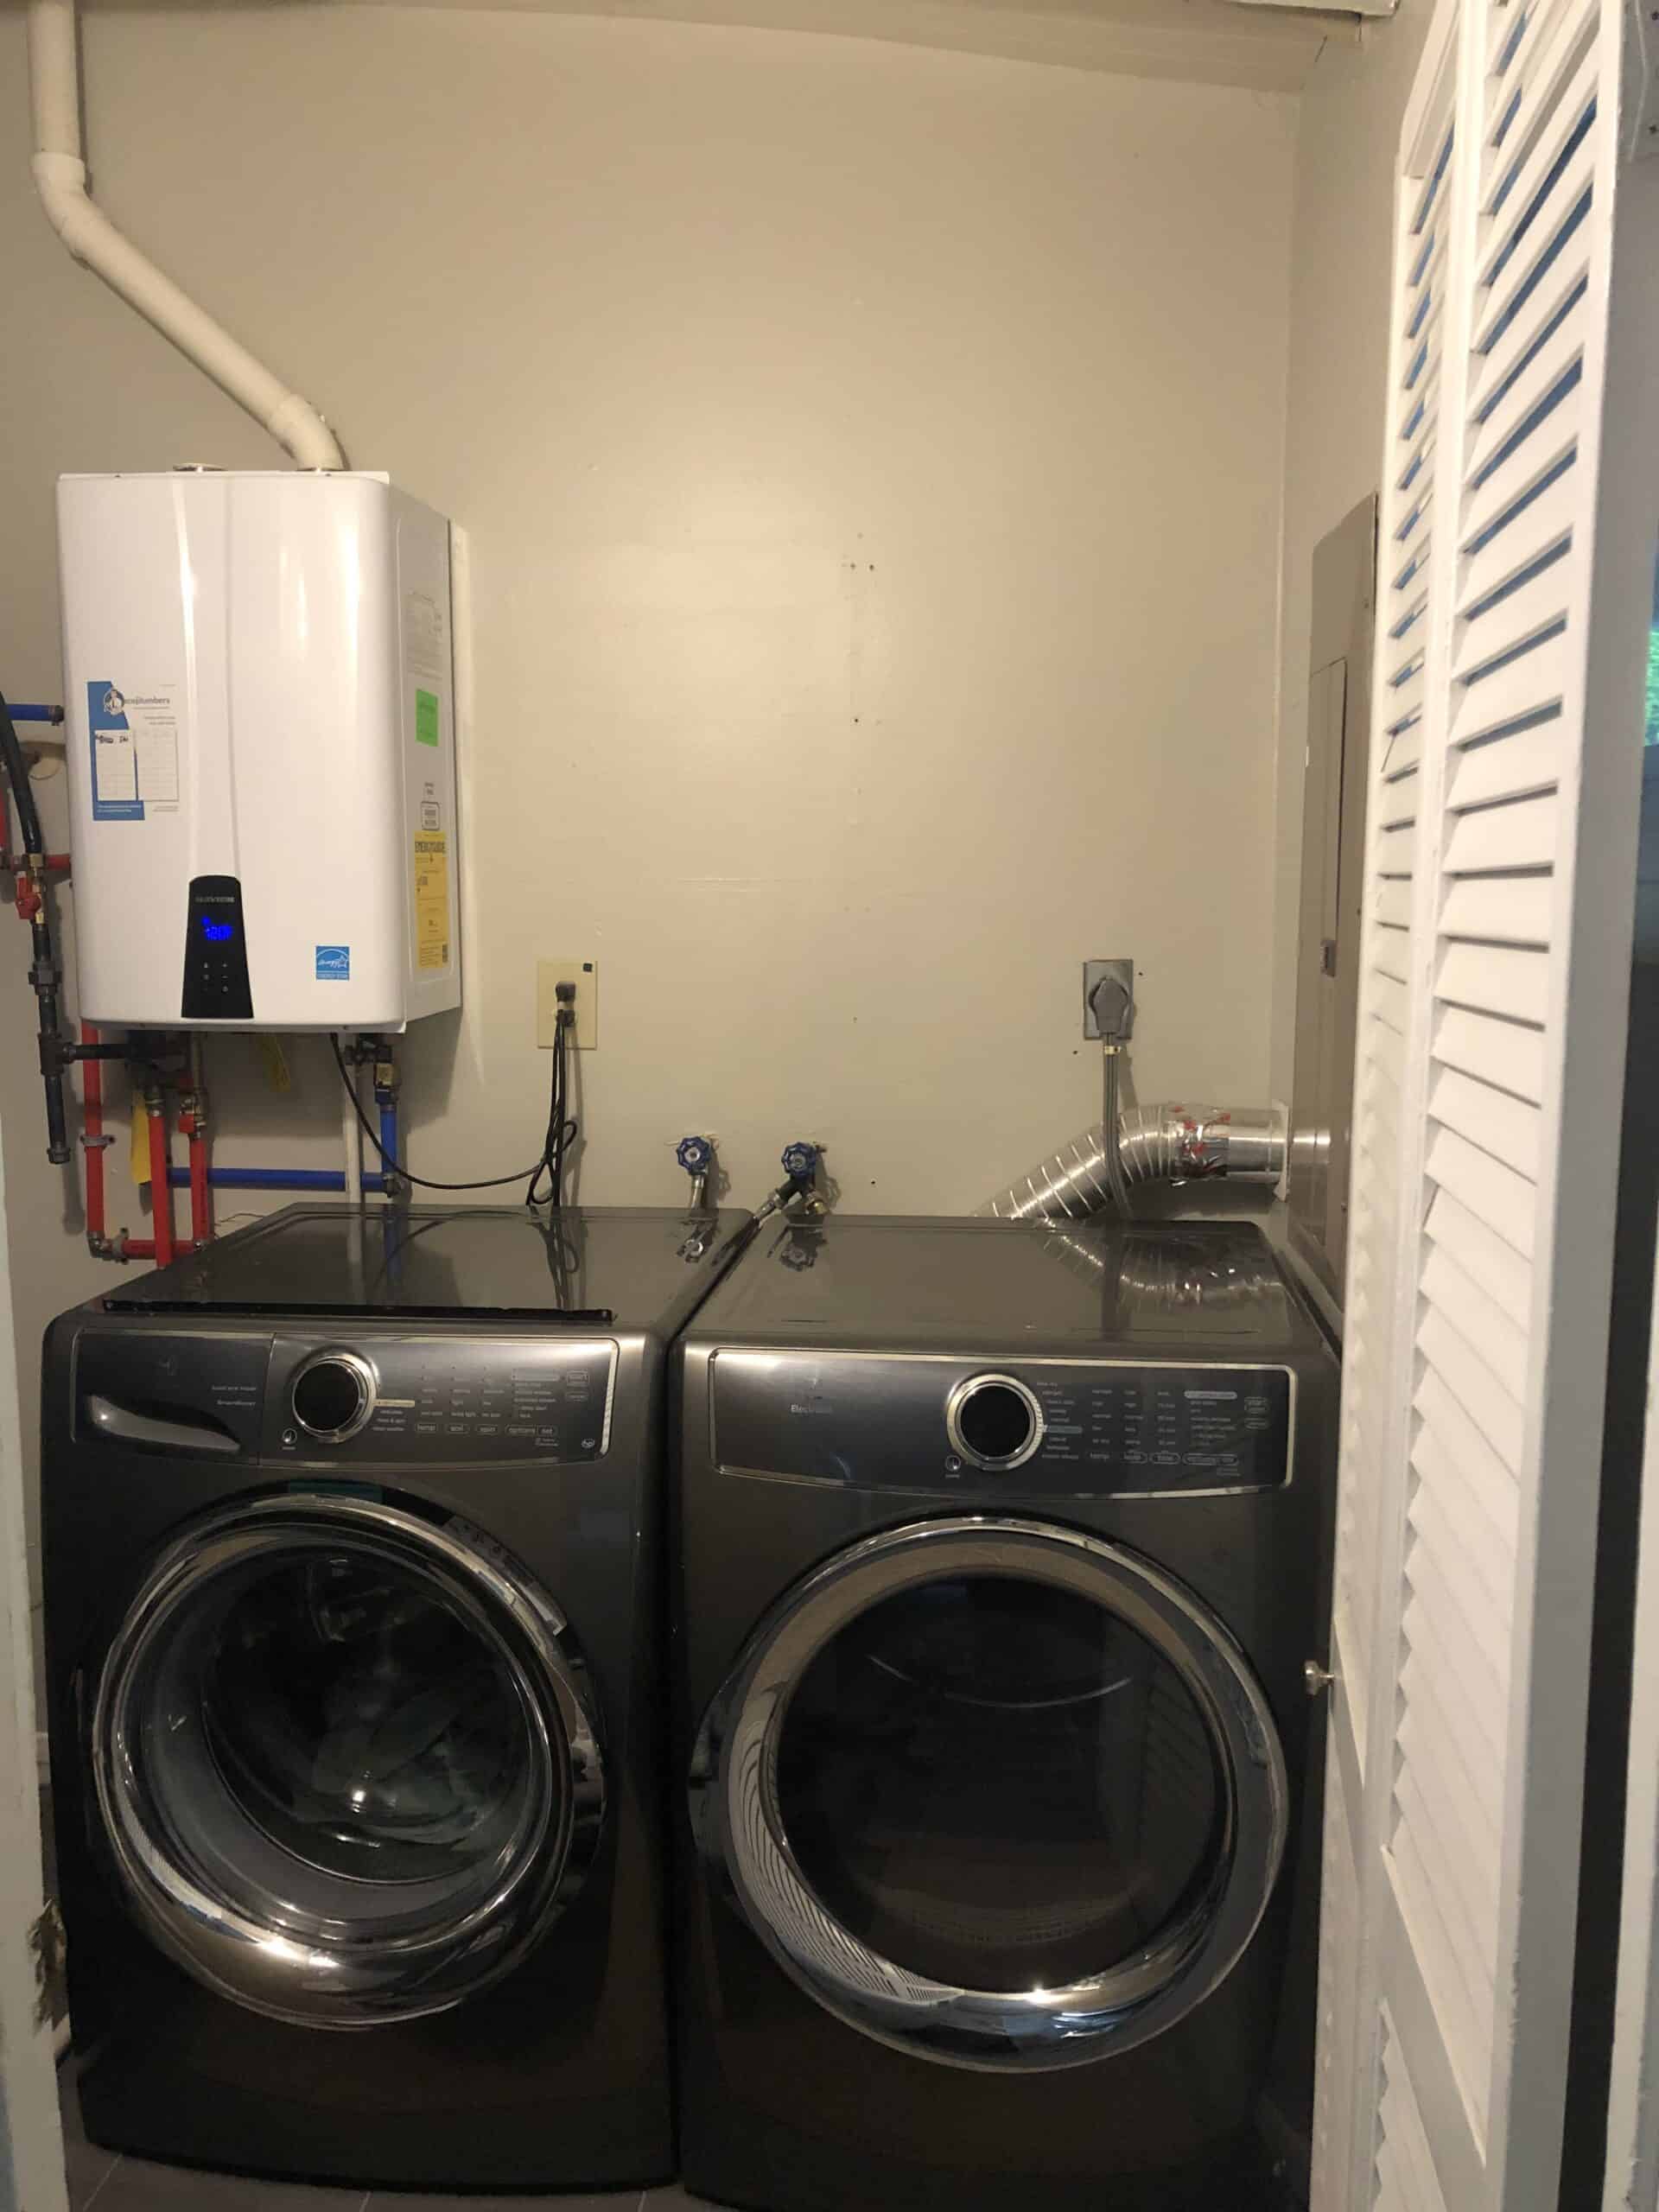 Laundry Room with front loan washer and dryer